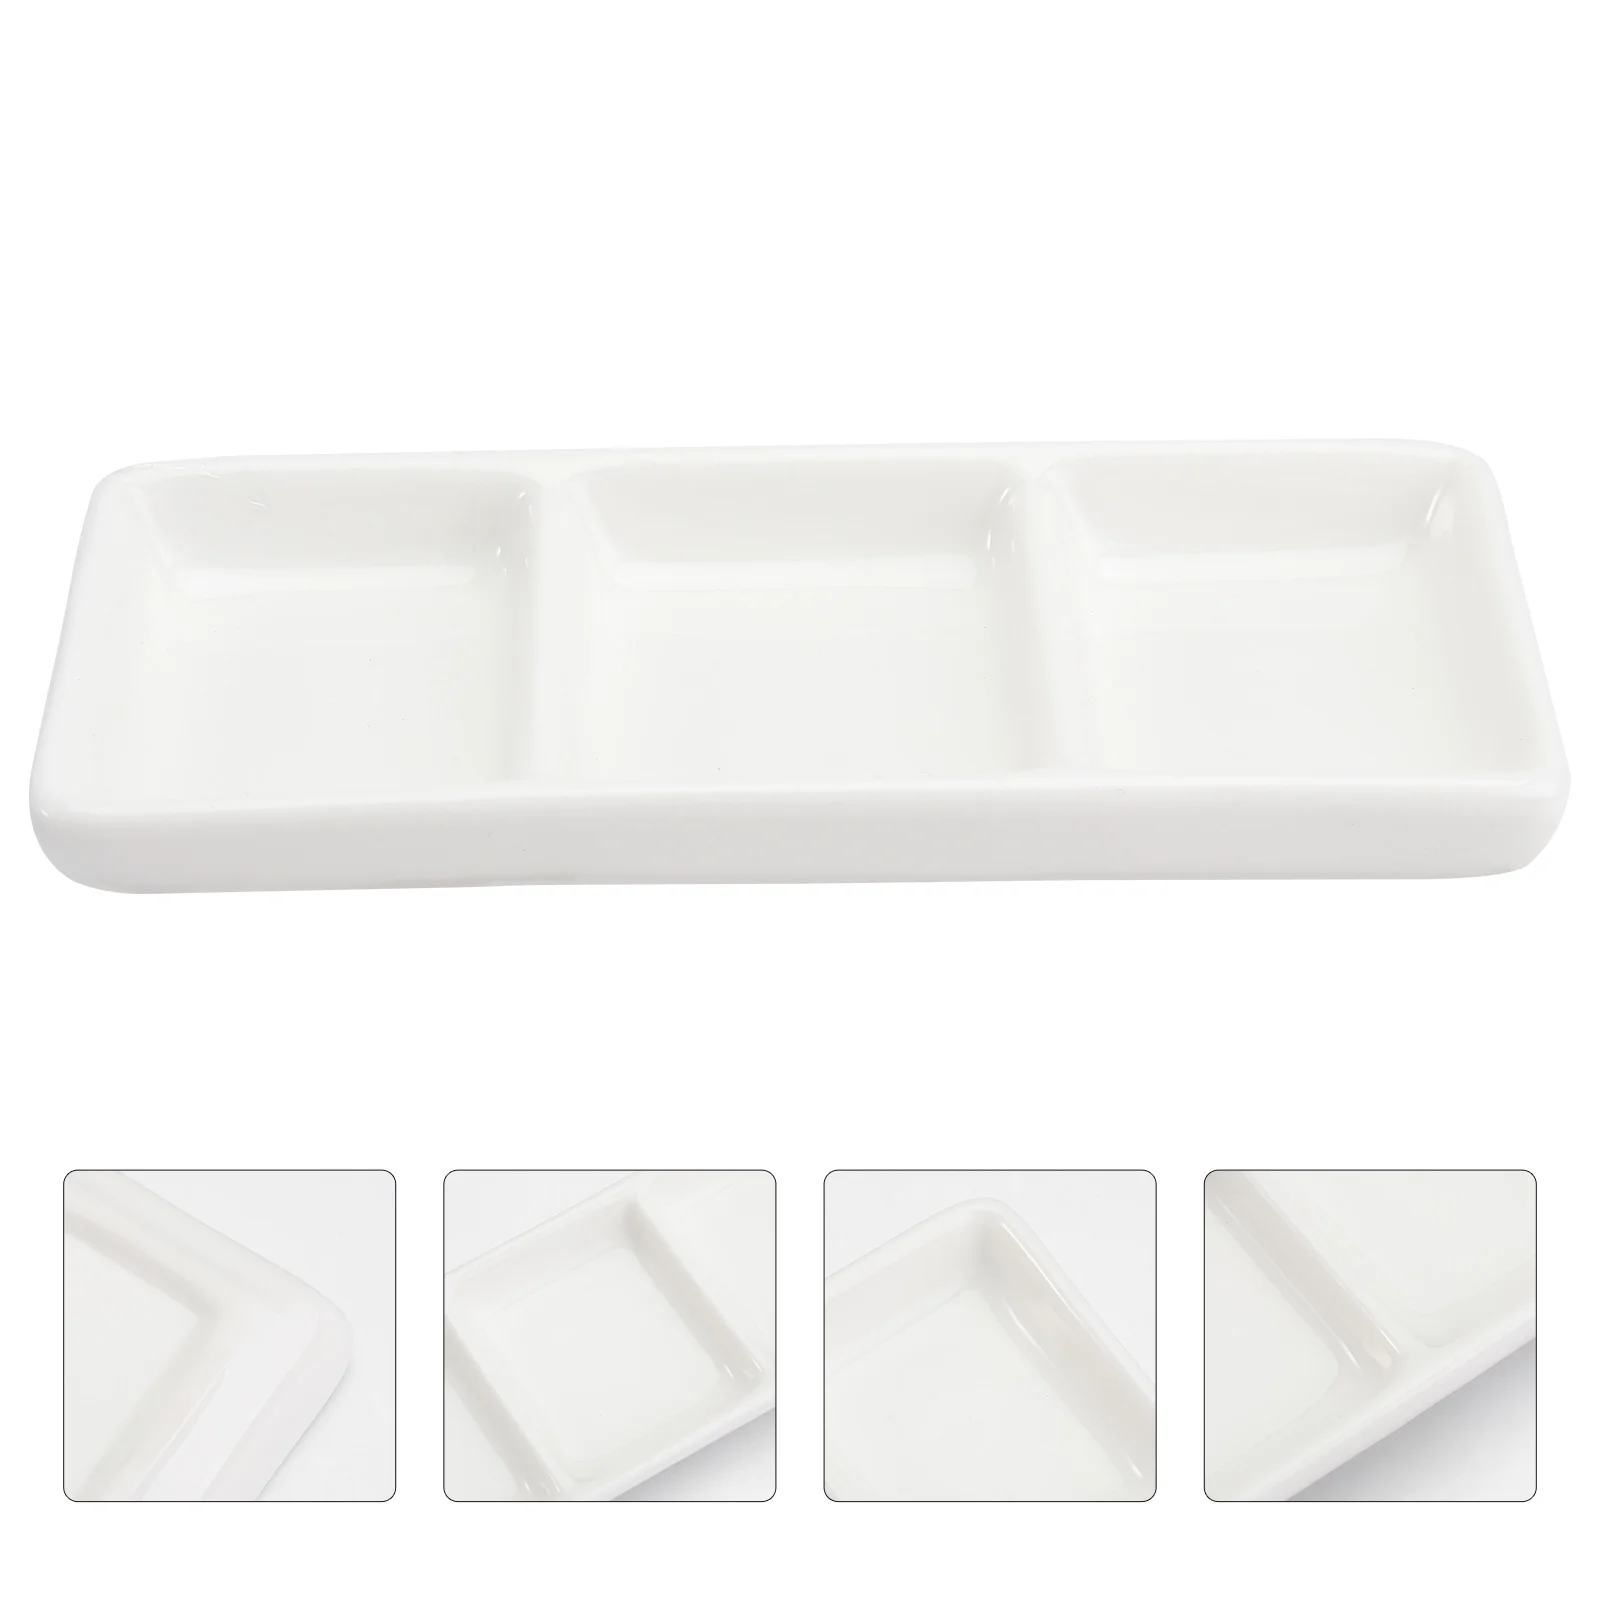 

Sauce Tray Dipping Serving Dishes Dish Plate Soy Divided Appetizer Ceramic Bowls Bowl Condiment Sushi Rectangular Seasoning Mini